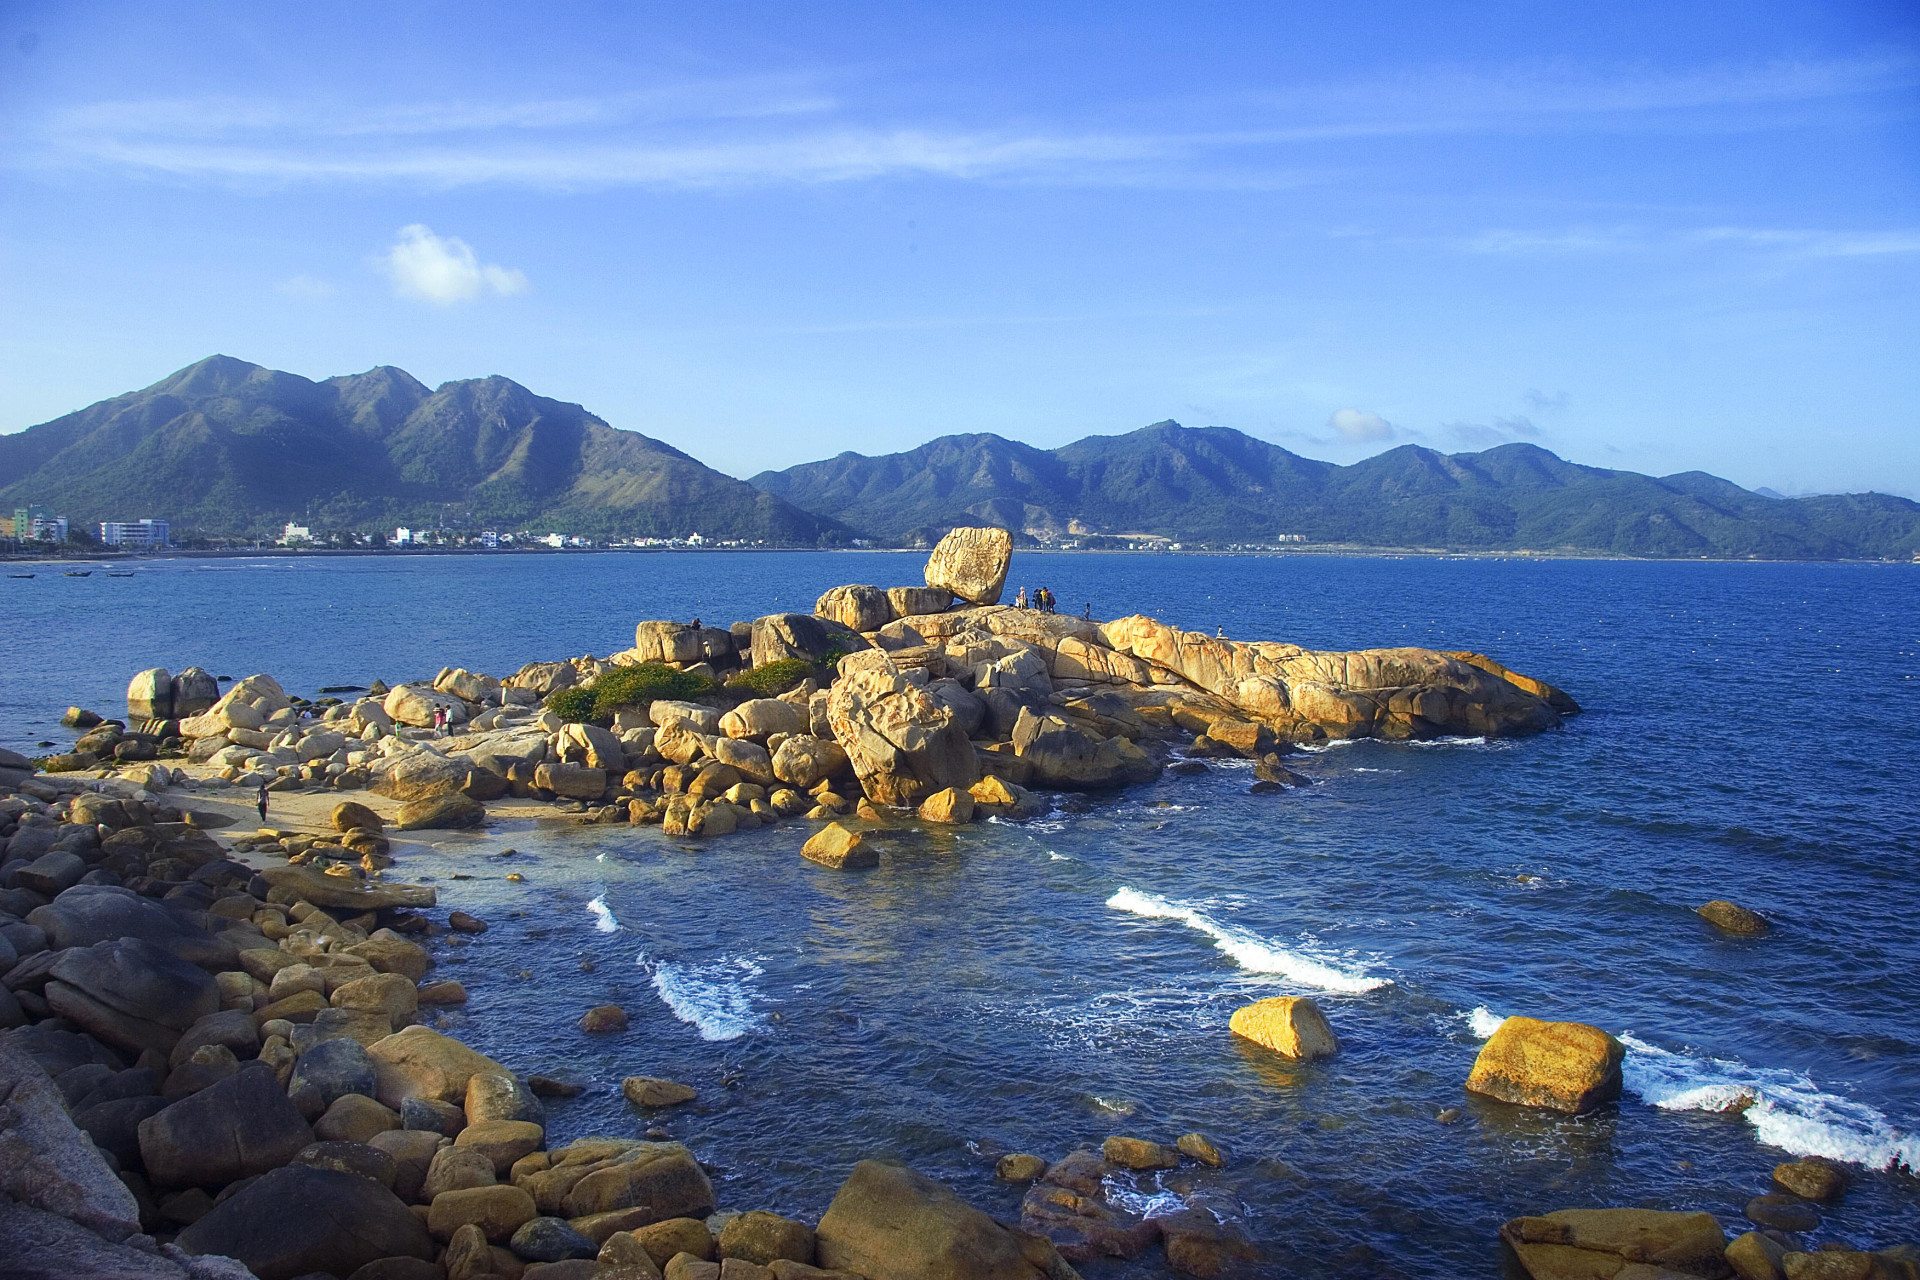 Hon Chong tourist site (Nha Trang), a national scenic spot recognized in 1998.